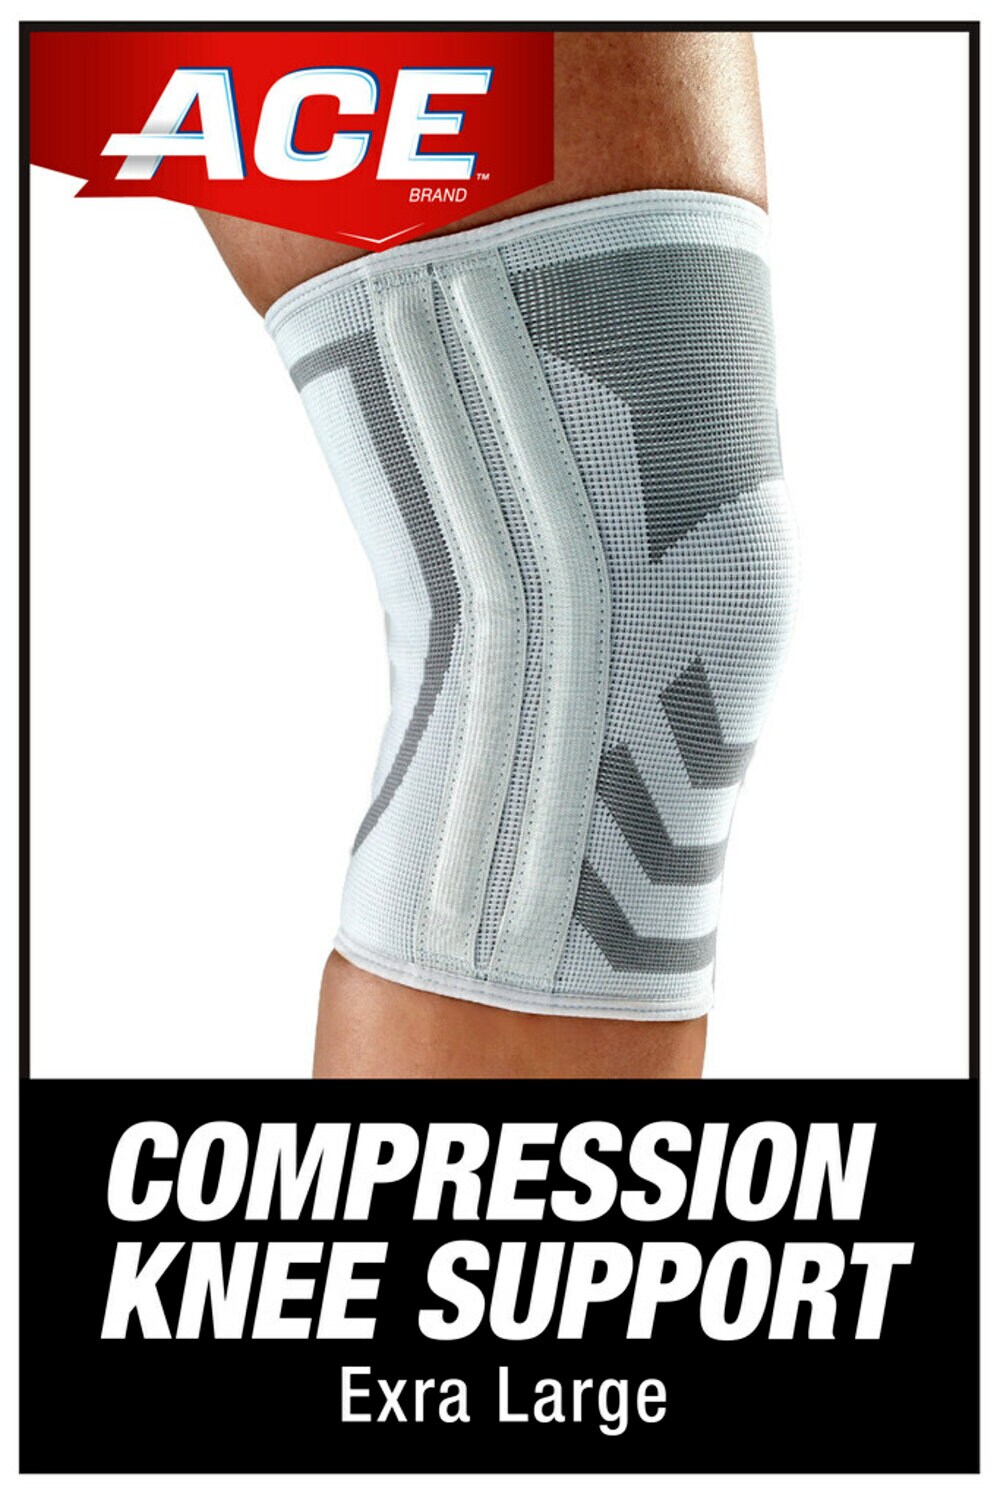 7100262894 - ACE Compression Knee Brace with side stabilizers 209618, XL